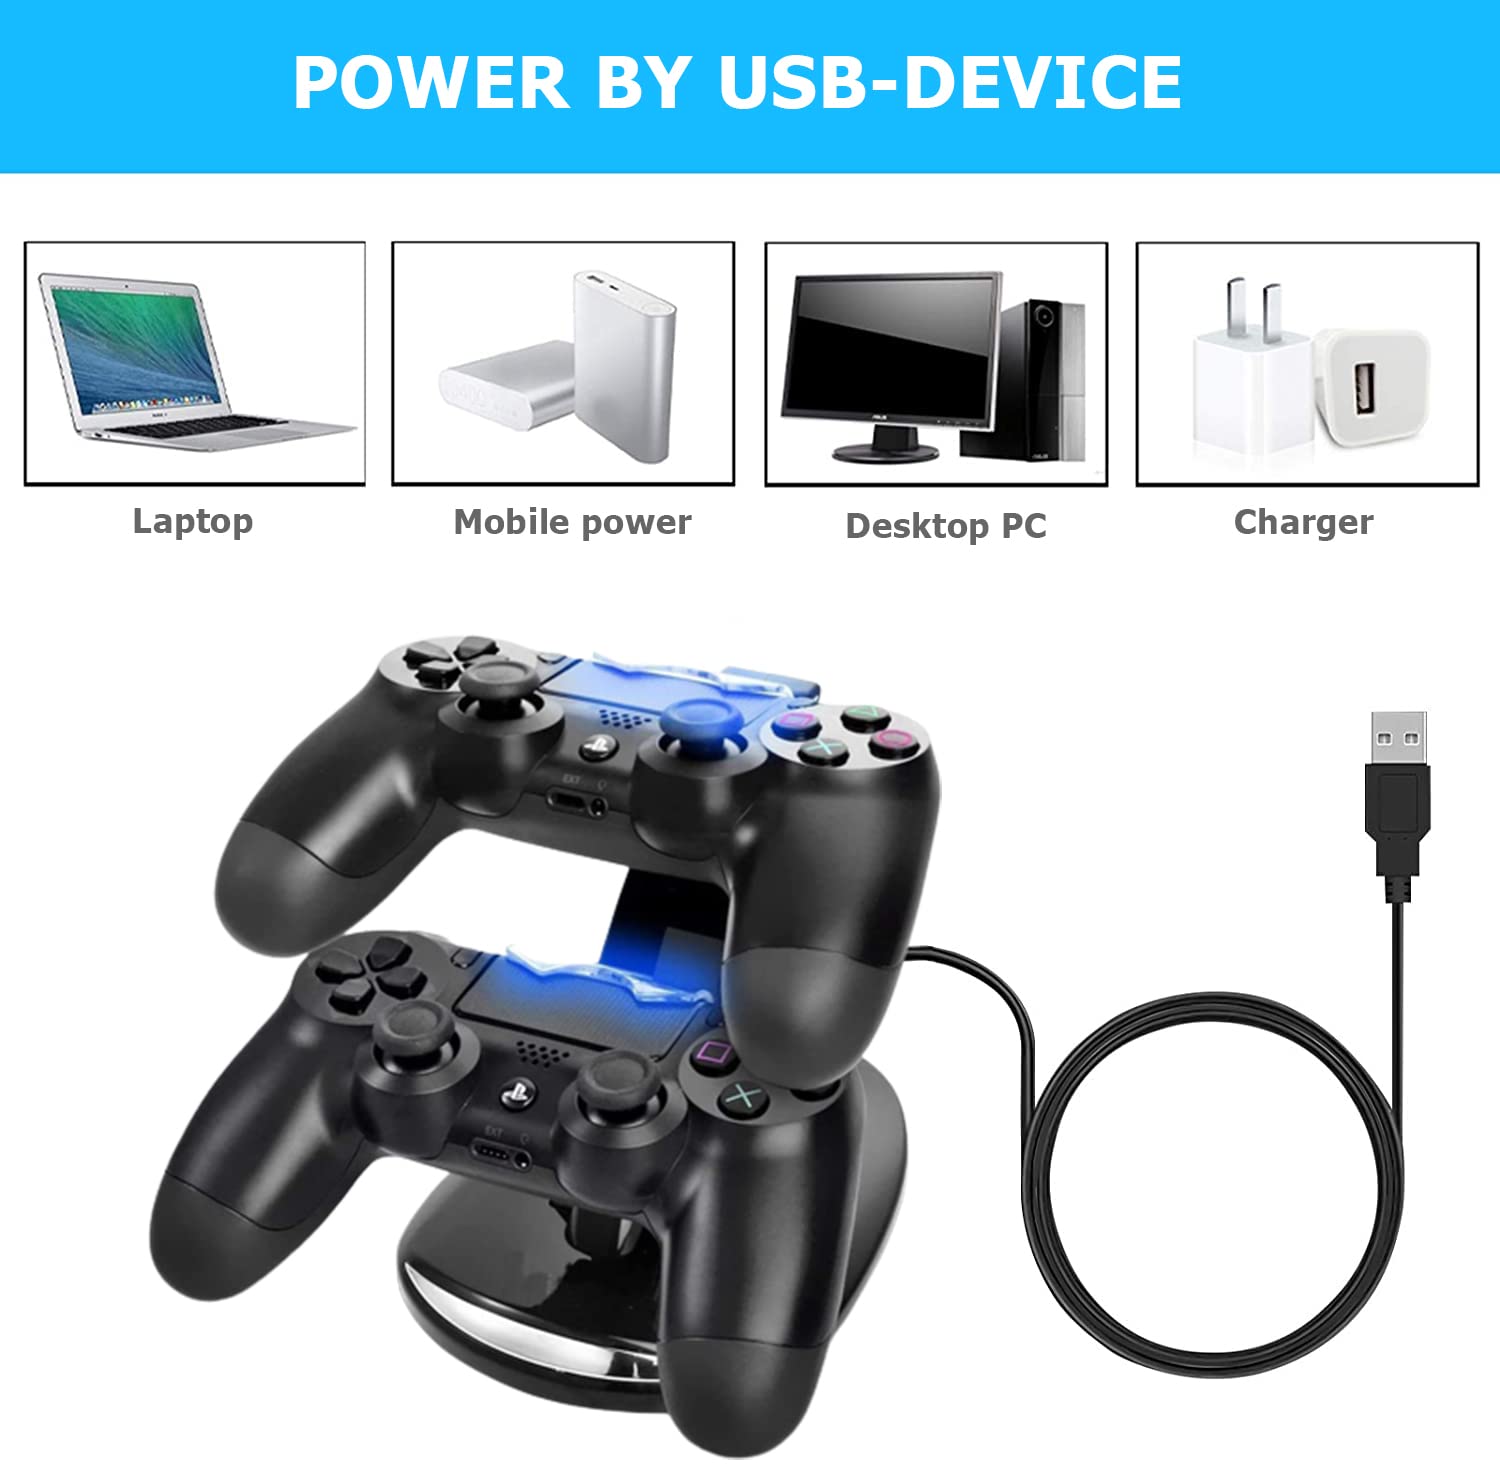 PS4 Controller Charger, Megadream Playstation 4 Charging Station for Sony PS4 / PS4 Pro / PS4 Slim DualShock 4 Controller, Dual USB Fast Charging Station Stand with LED Indicator Light